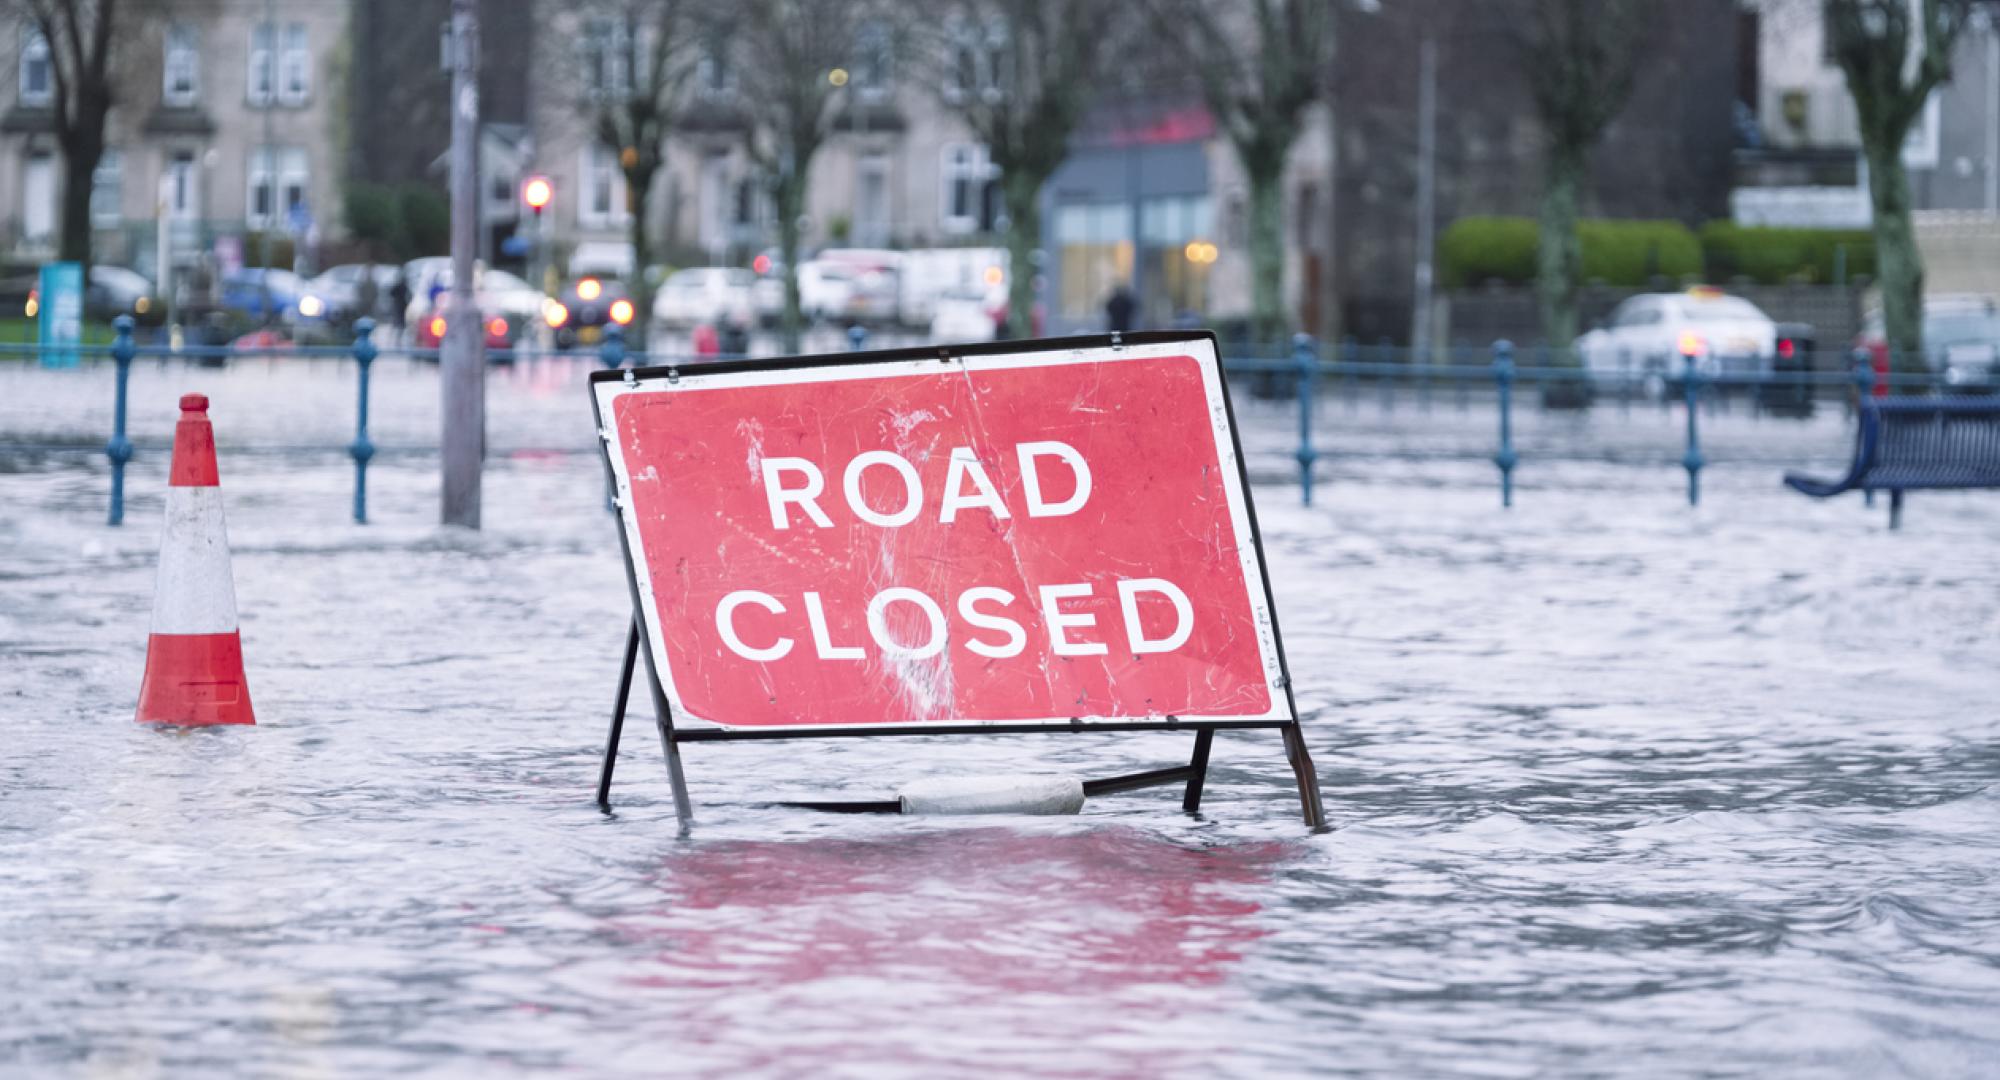 Road closed sign in a flooded street